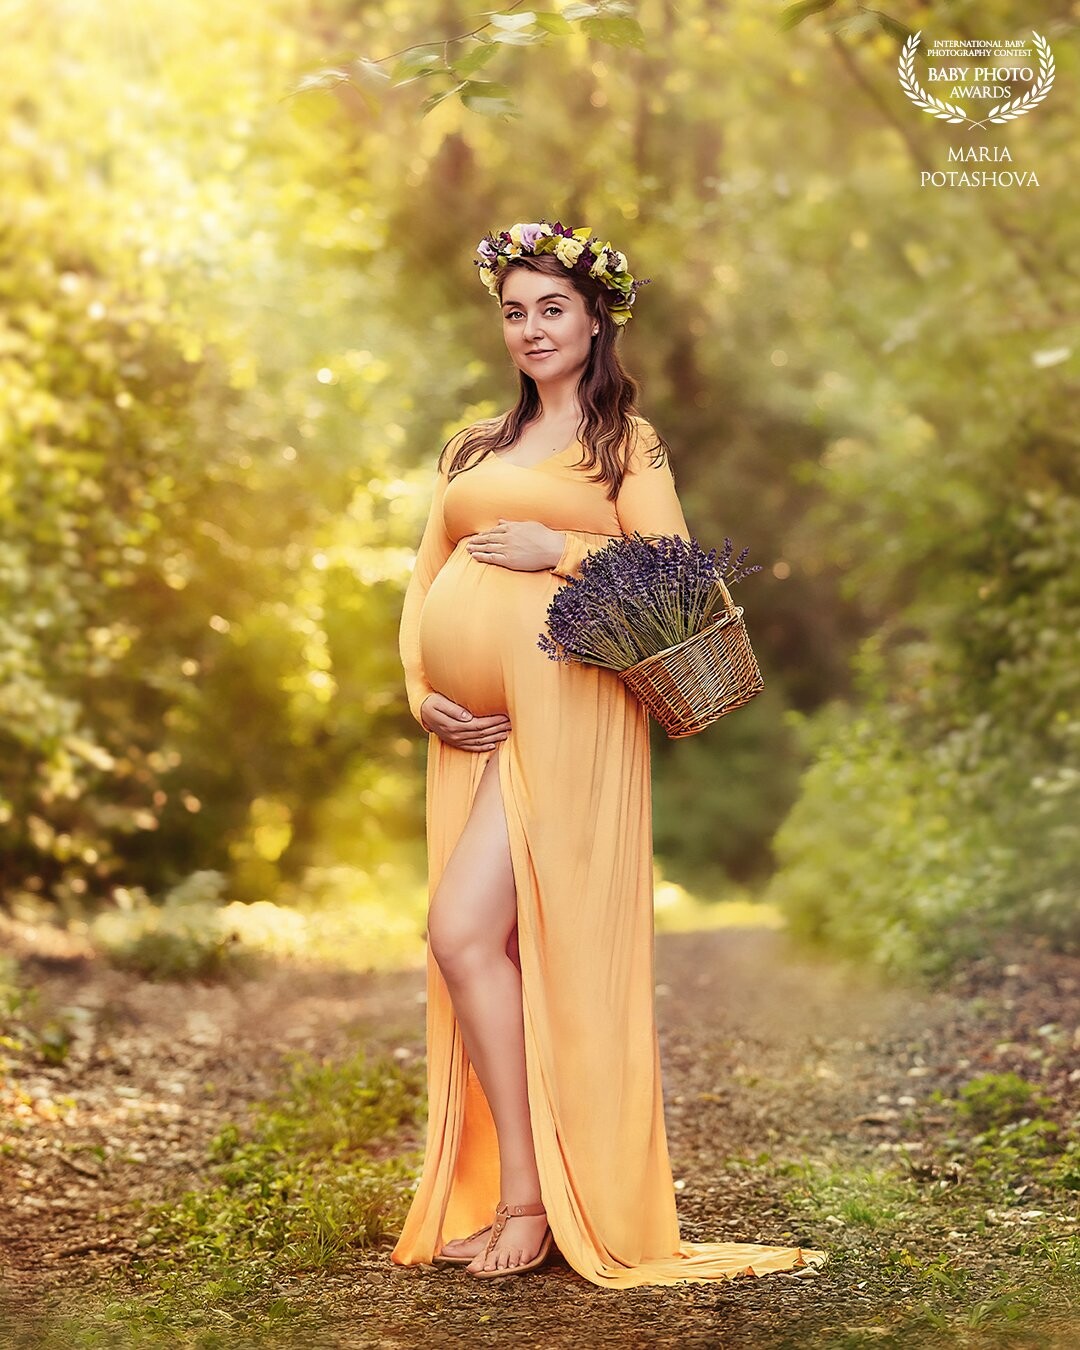 Life is always a rich and steady time when you are waiting for something to happen or to hatch.<br />
The Maternity photo session is the one of the most popular and unforgettable experiences. Carrying and expecting a baby is a miracle that needs to be recorded.